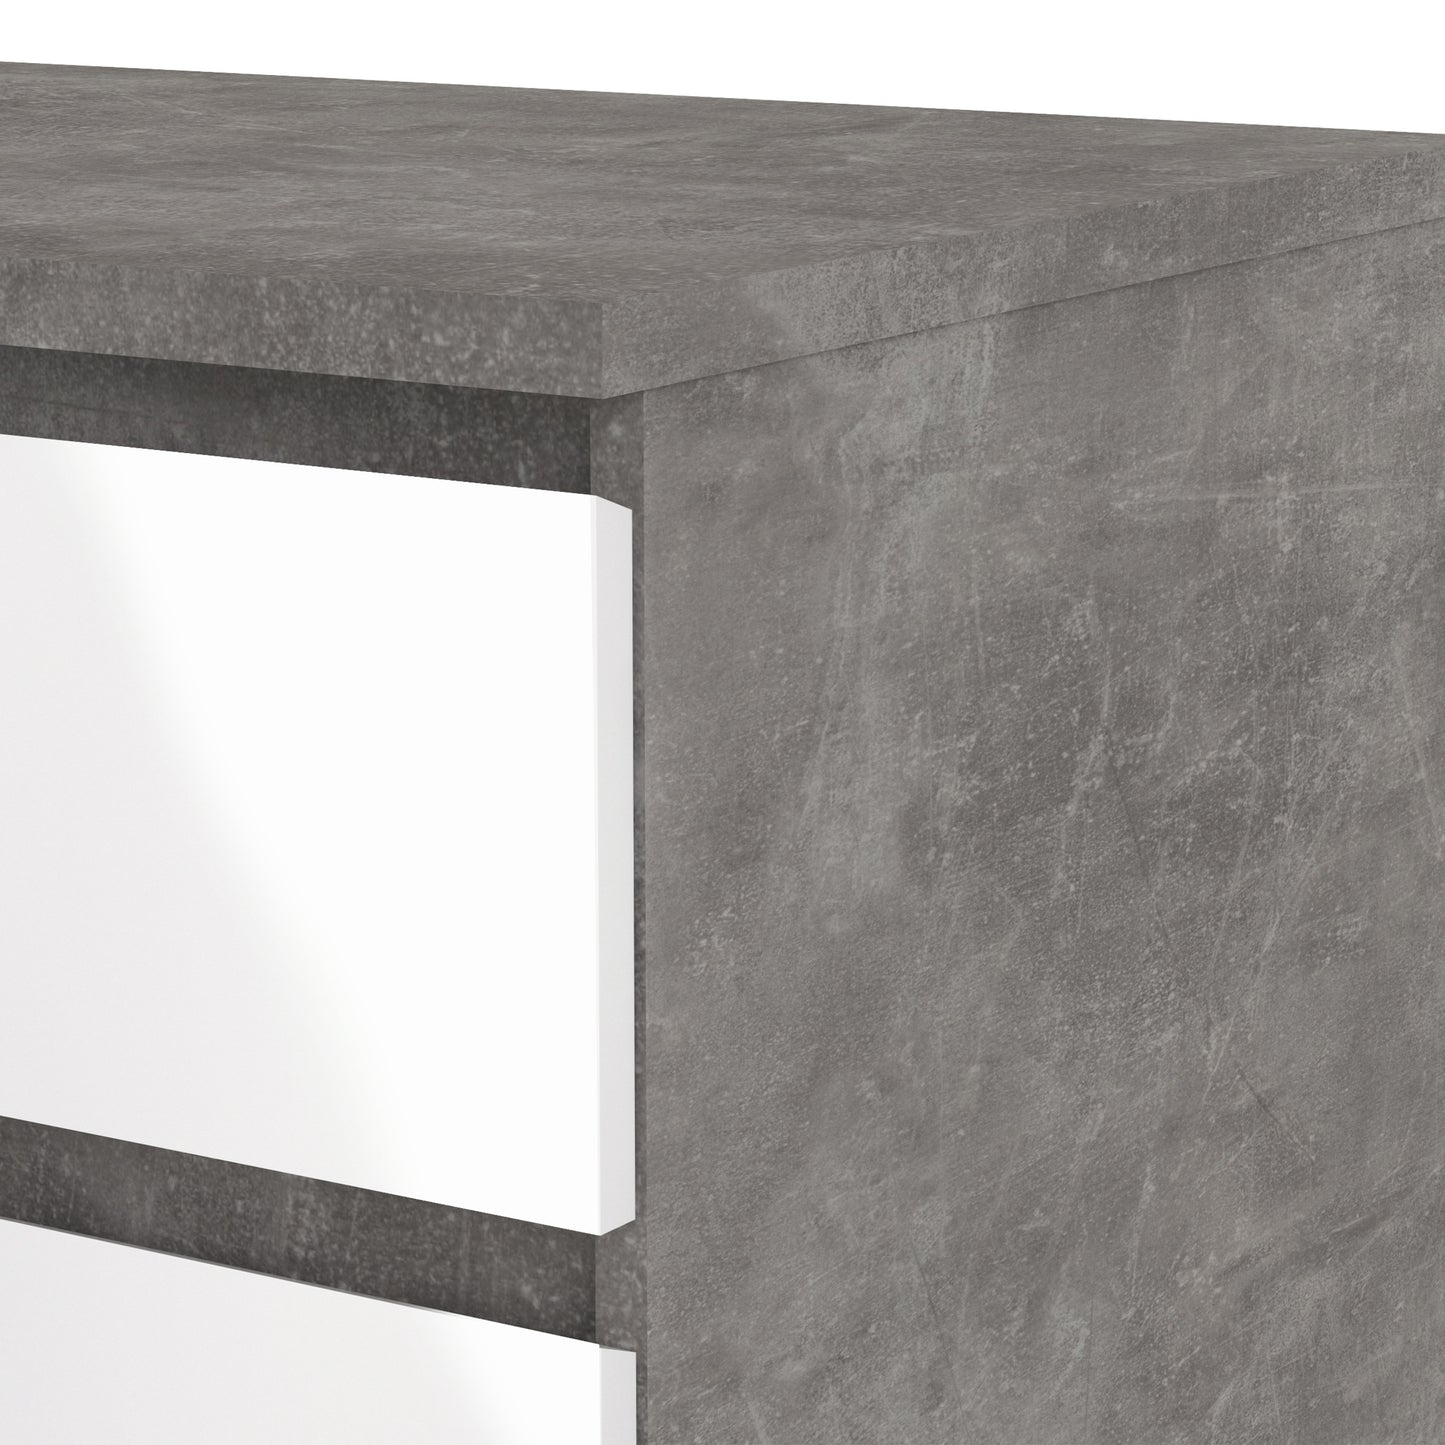 Naia  Sideboard 1 Drawer 2 Doors in Concrete and White High Gloss